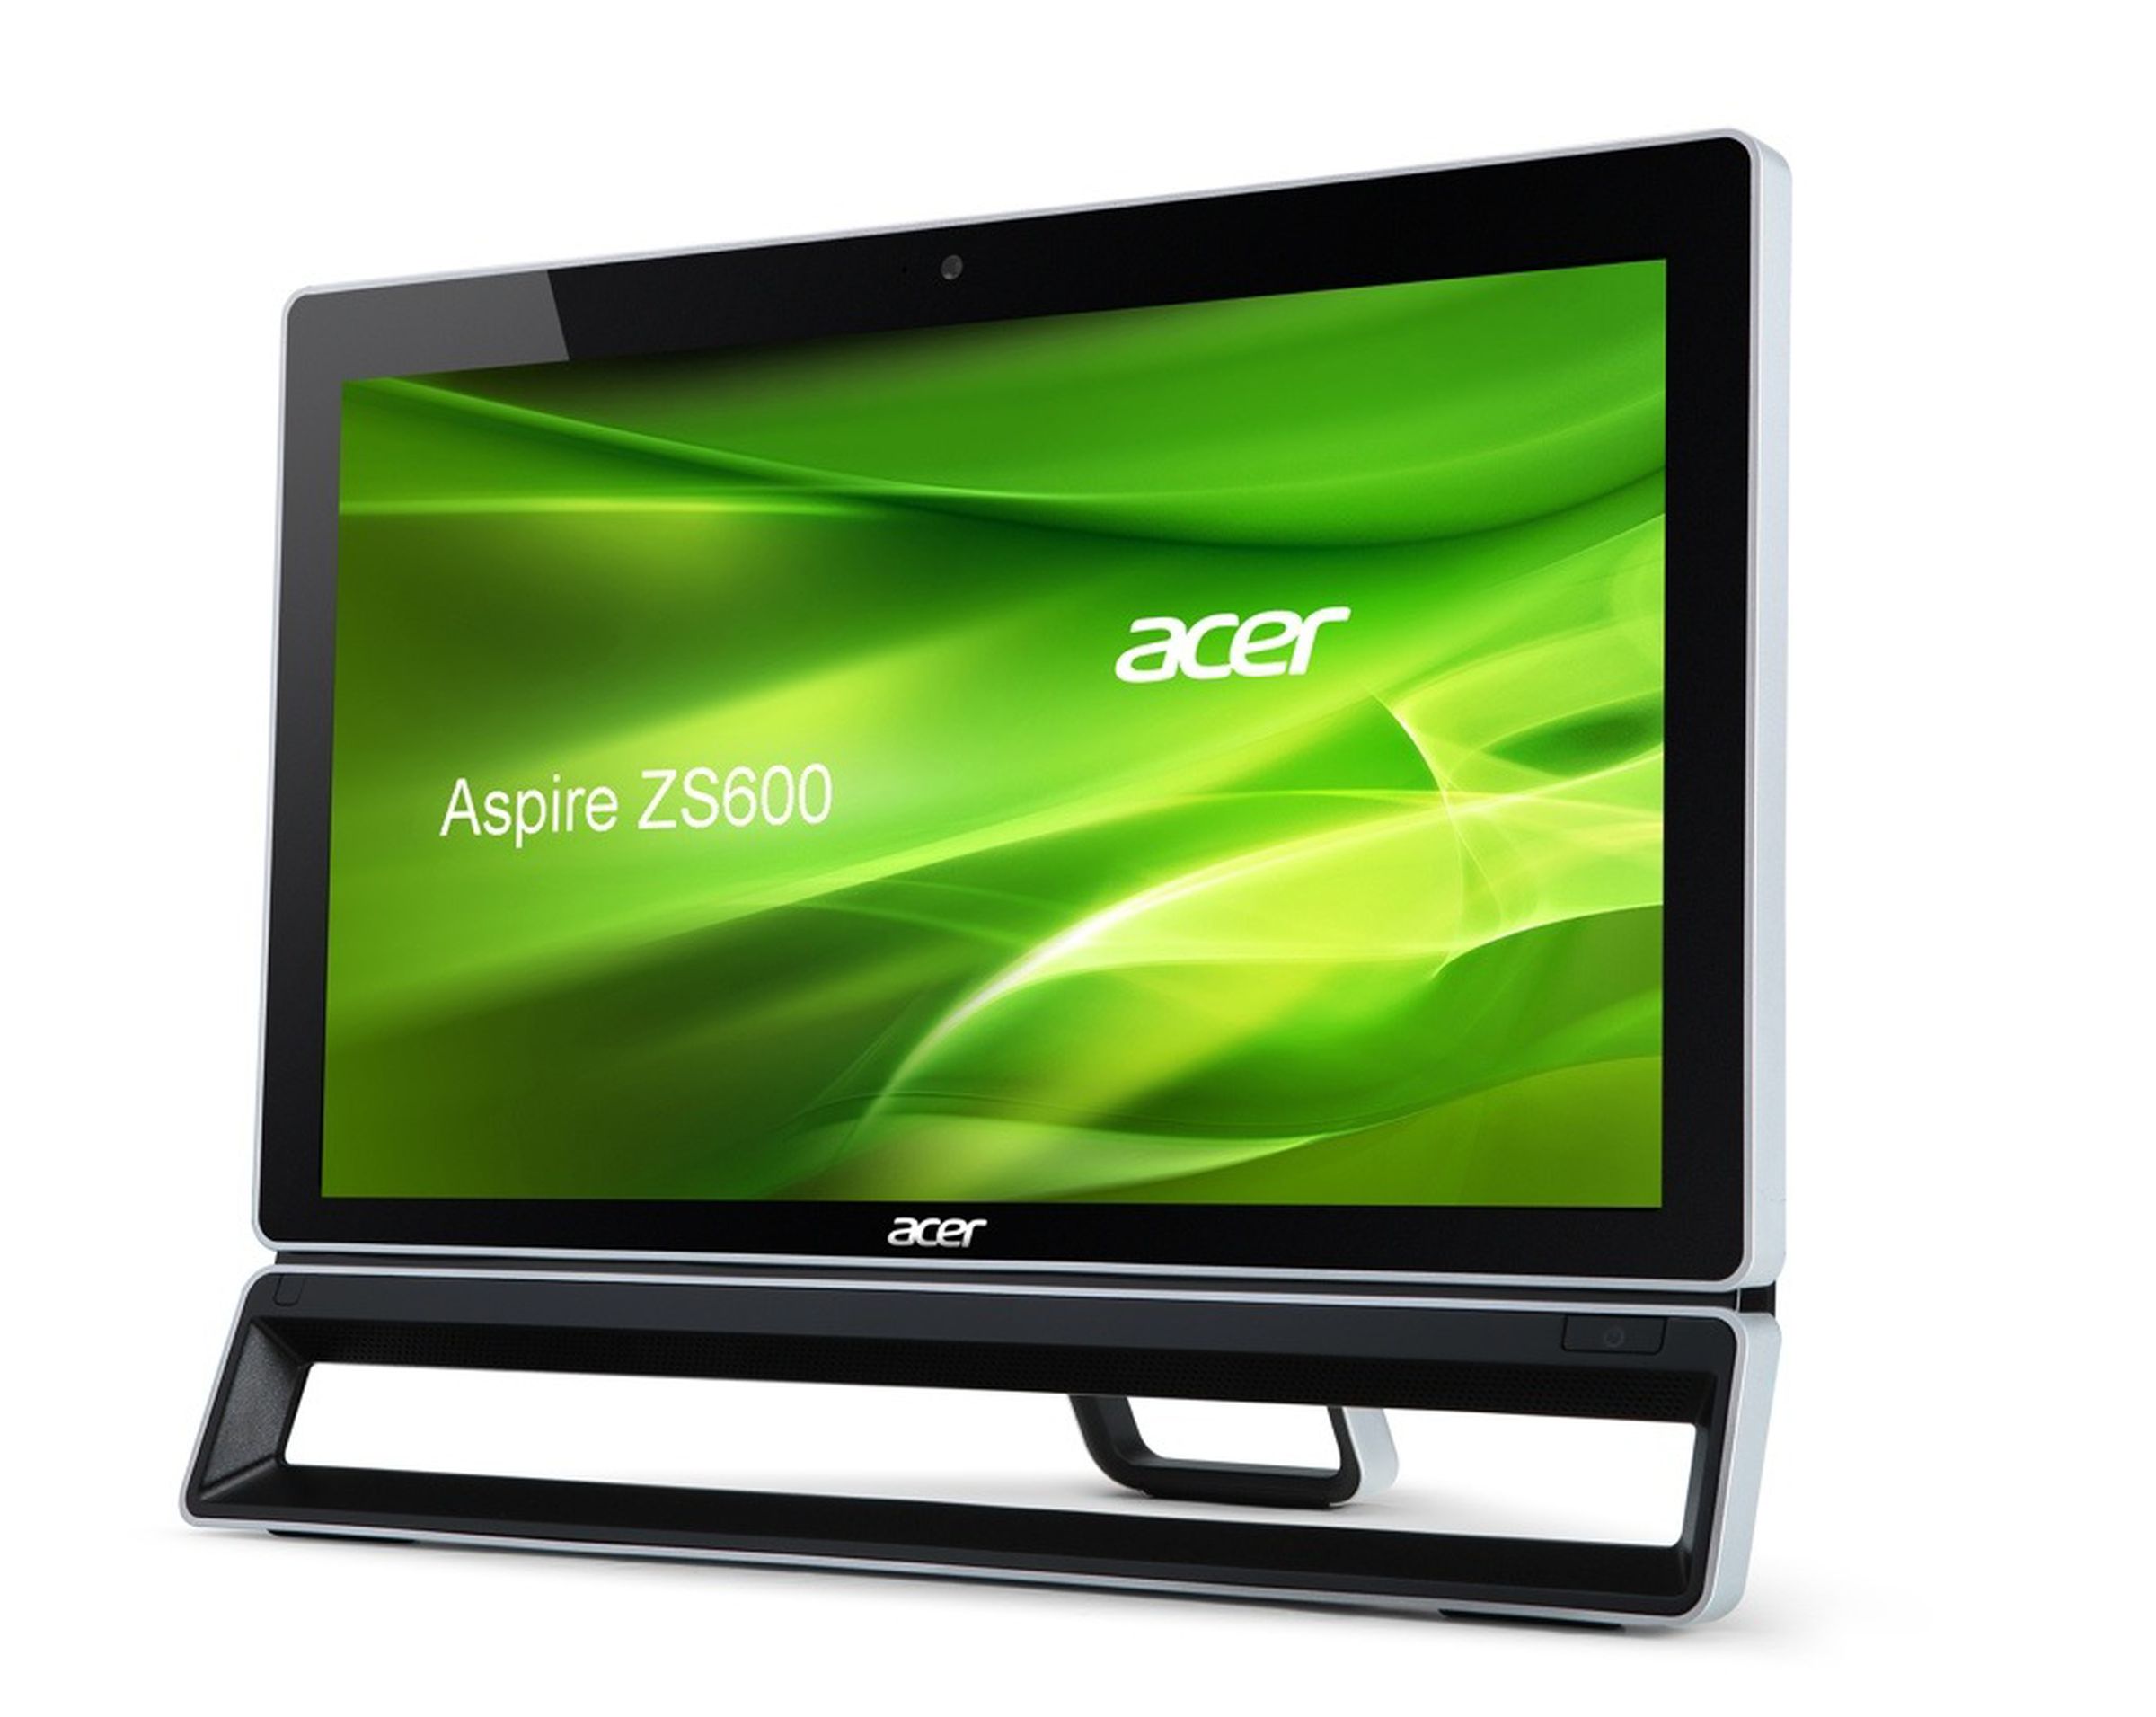 Acer Aspire ZS600 press pictures